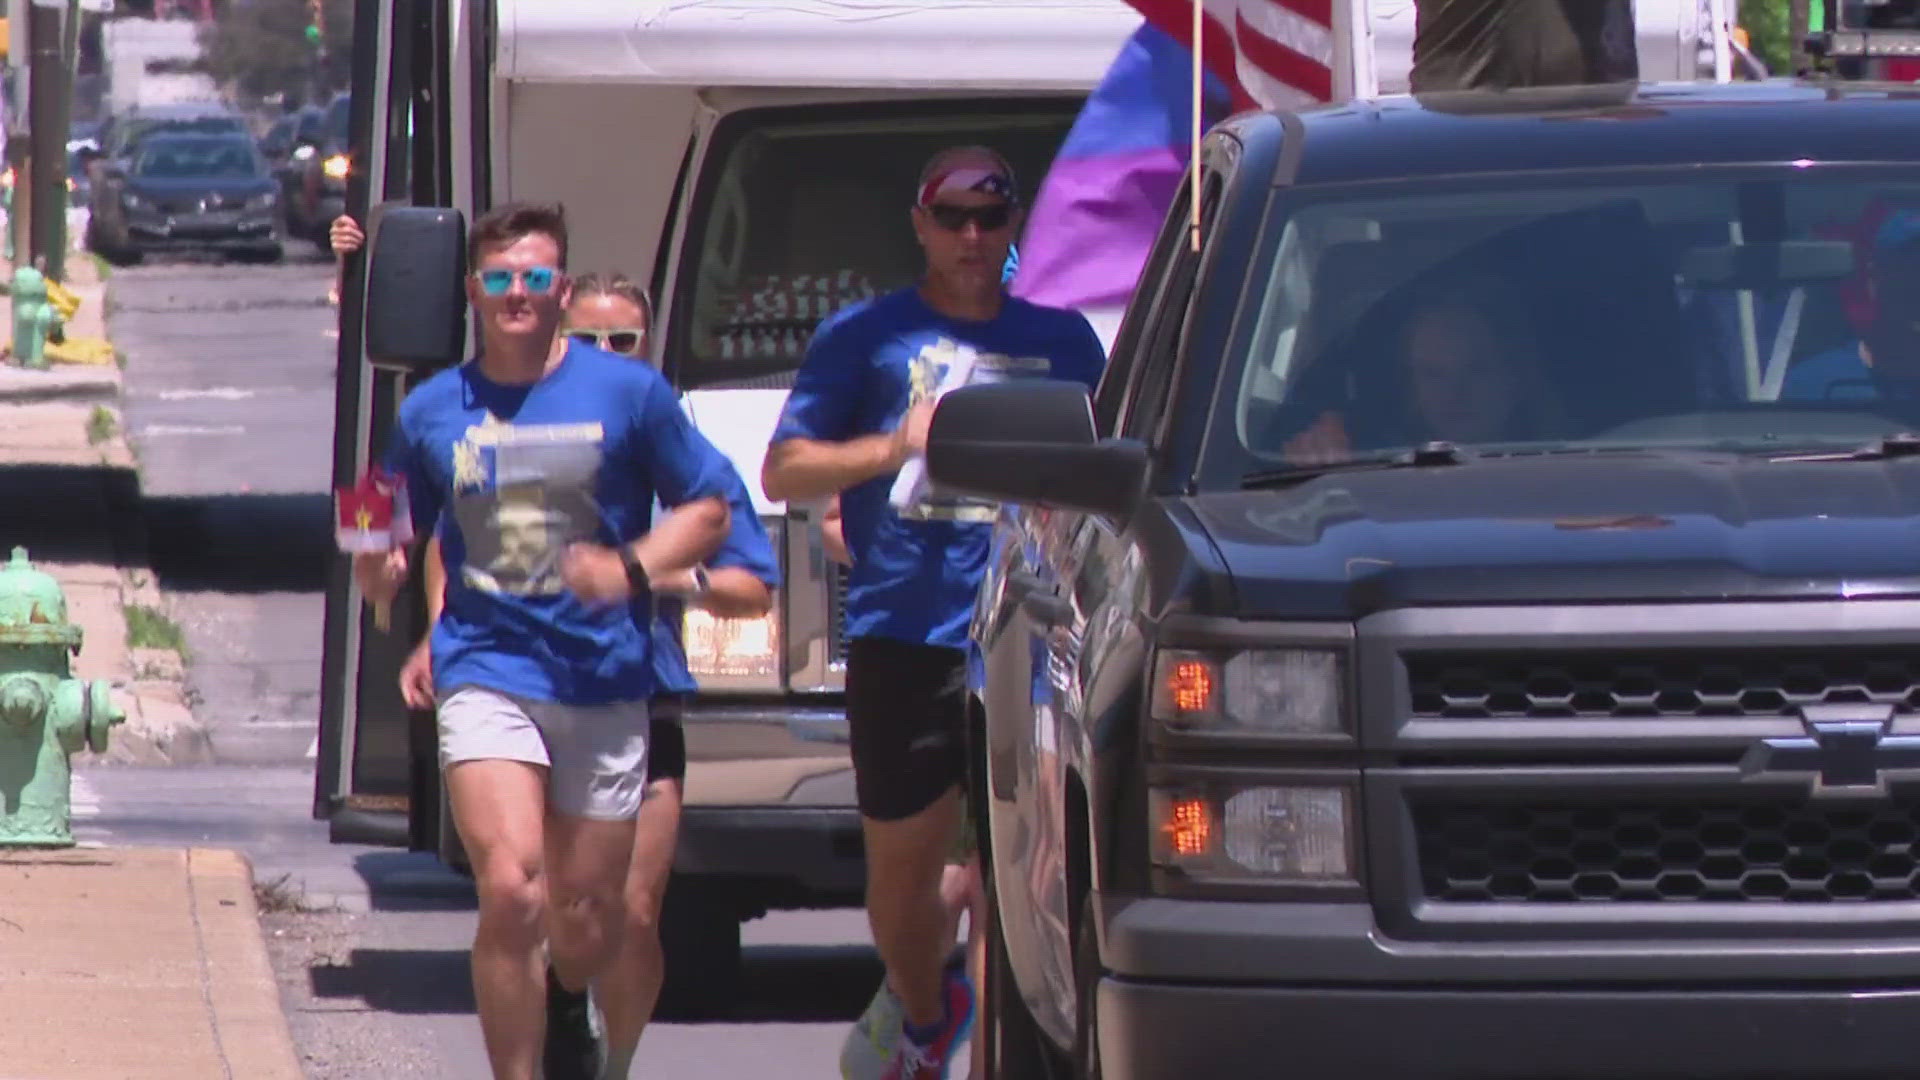 Indiana's 10th annual "Run for the Fallen" pays tribute to Hoosier military members who died while serving or as a result of serving during the war on terror.